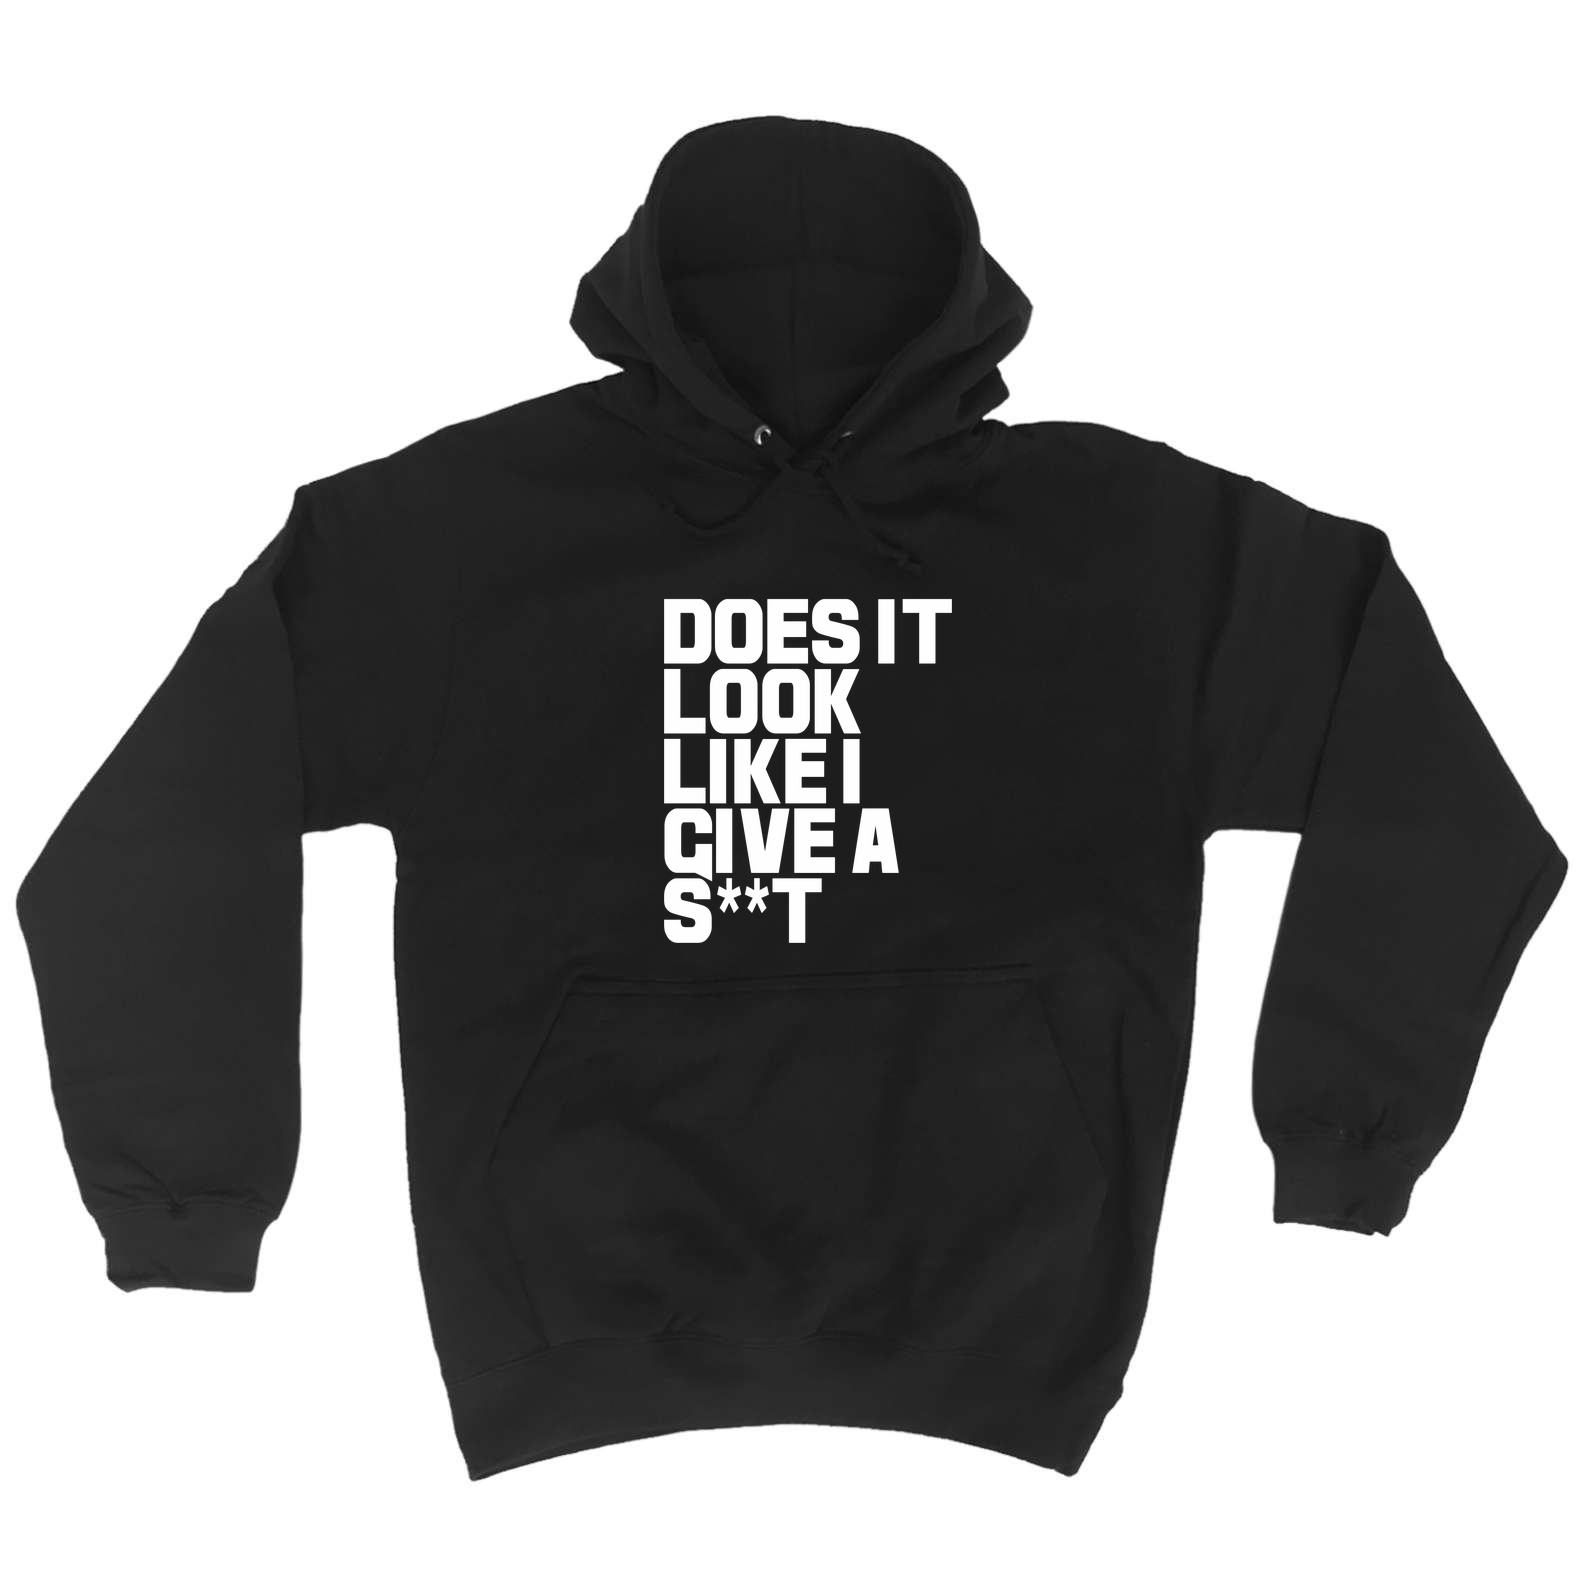 Funny Novelty Hoodie Hoody hooded Top - Does It Look Like I Give A | eBay